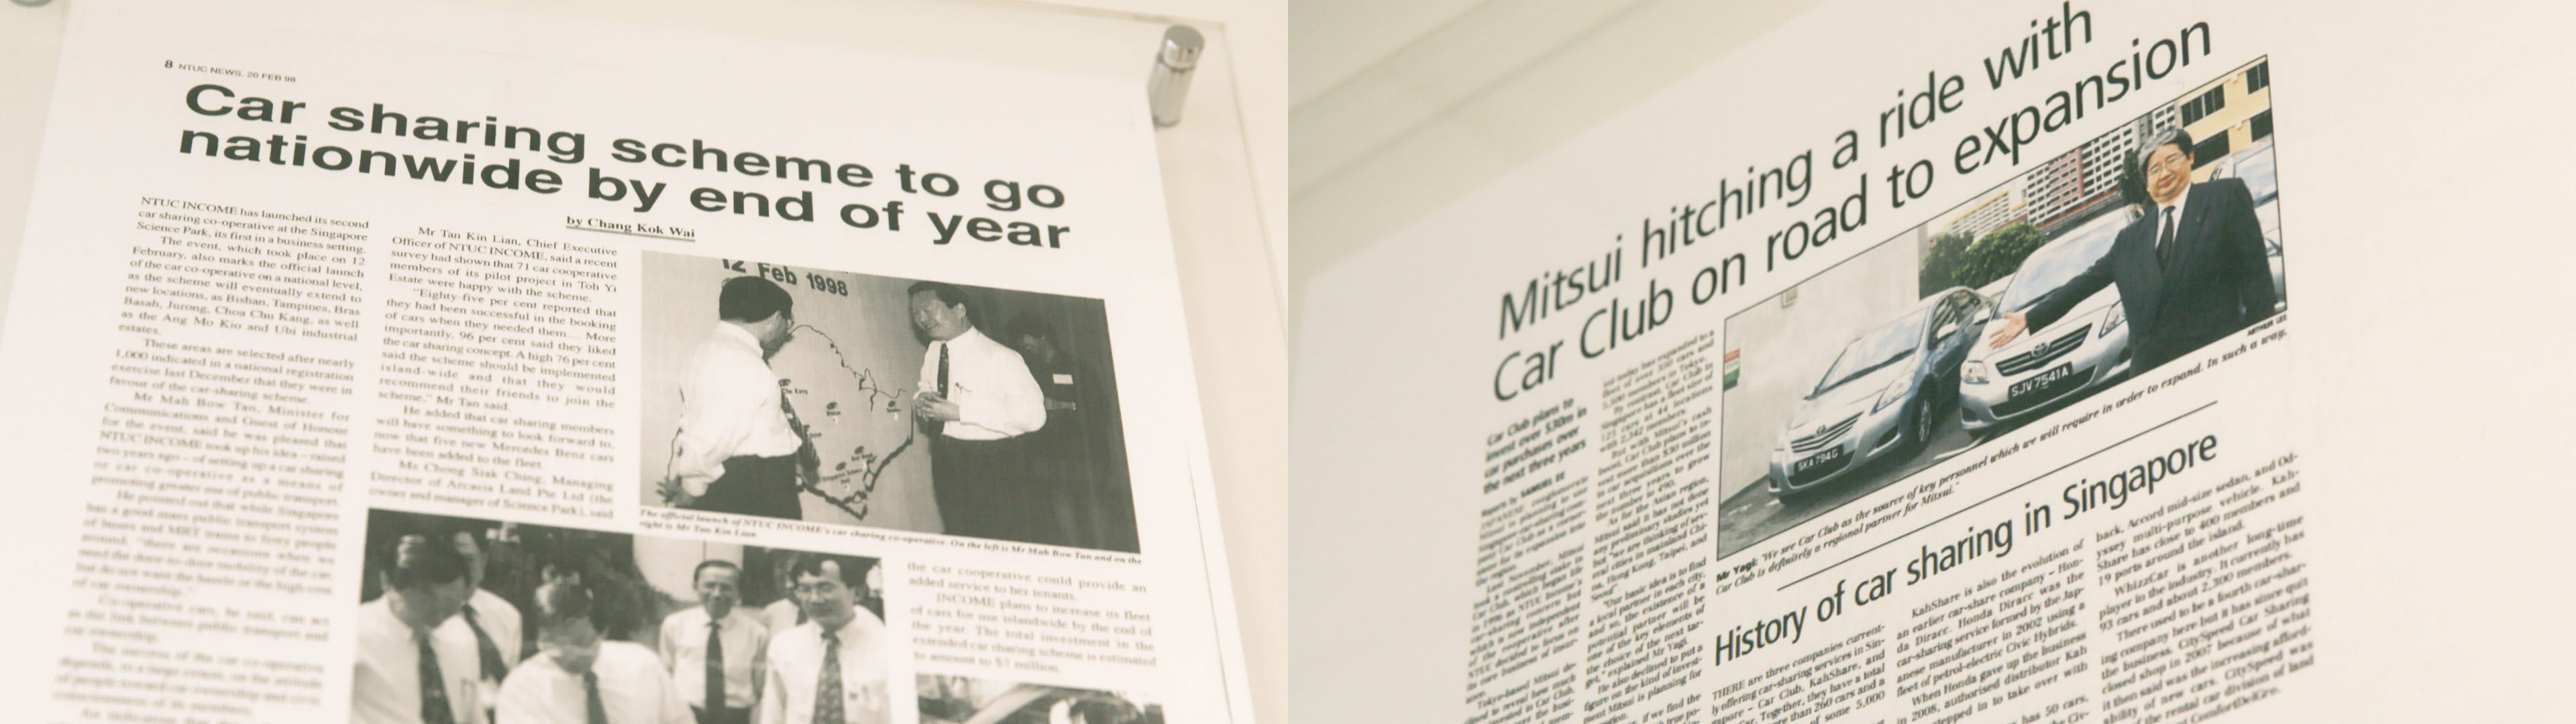 Newspaper showing the history of Carclub throughout the years